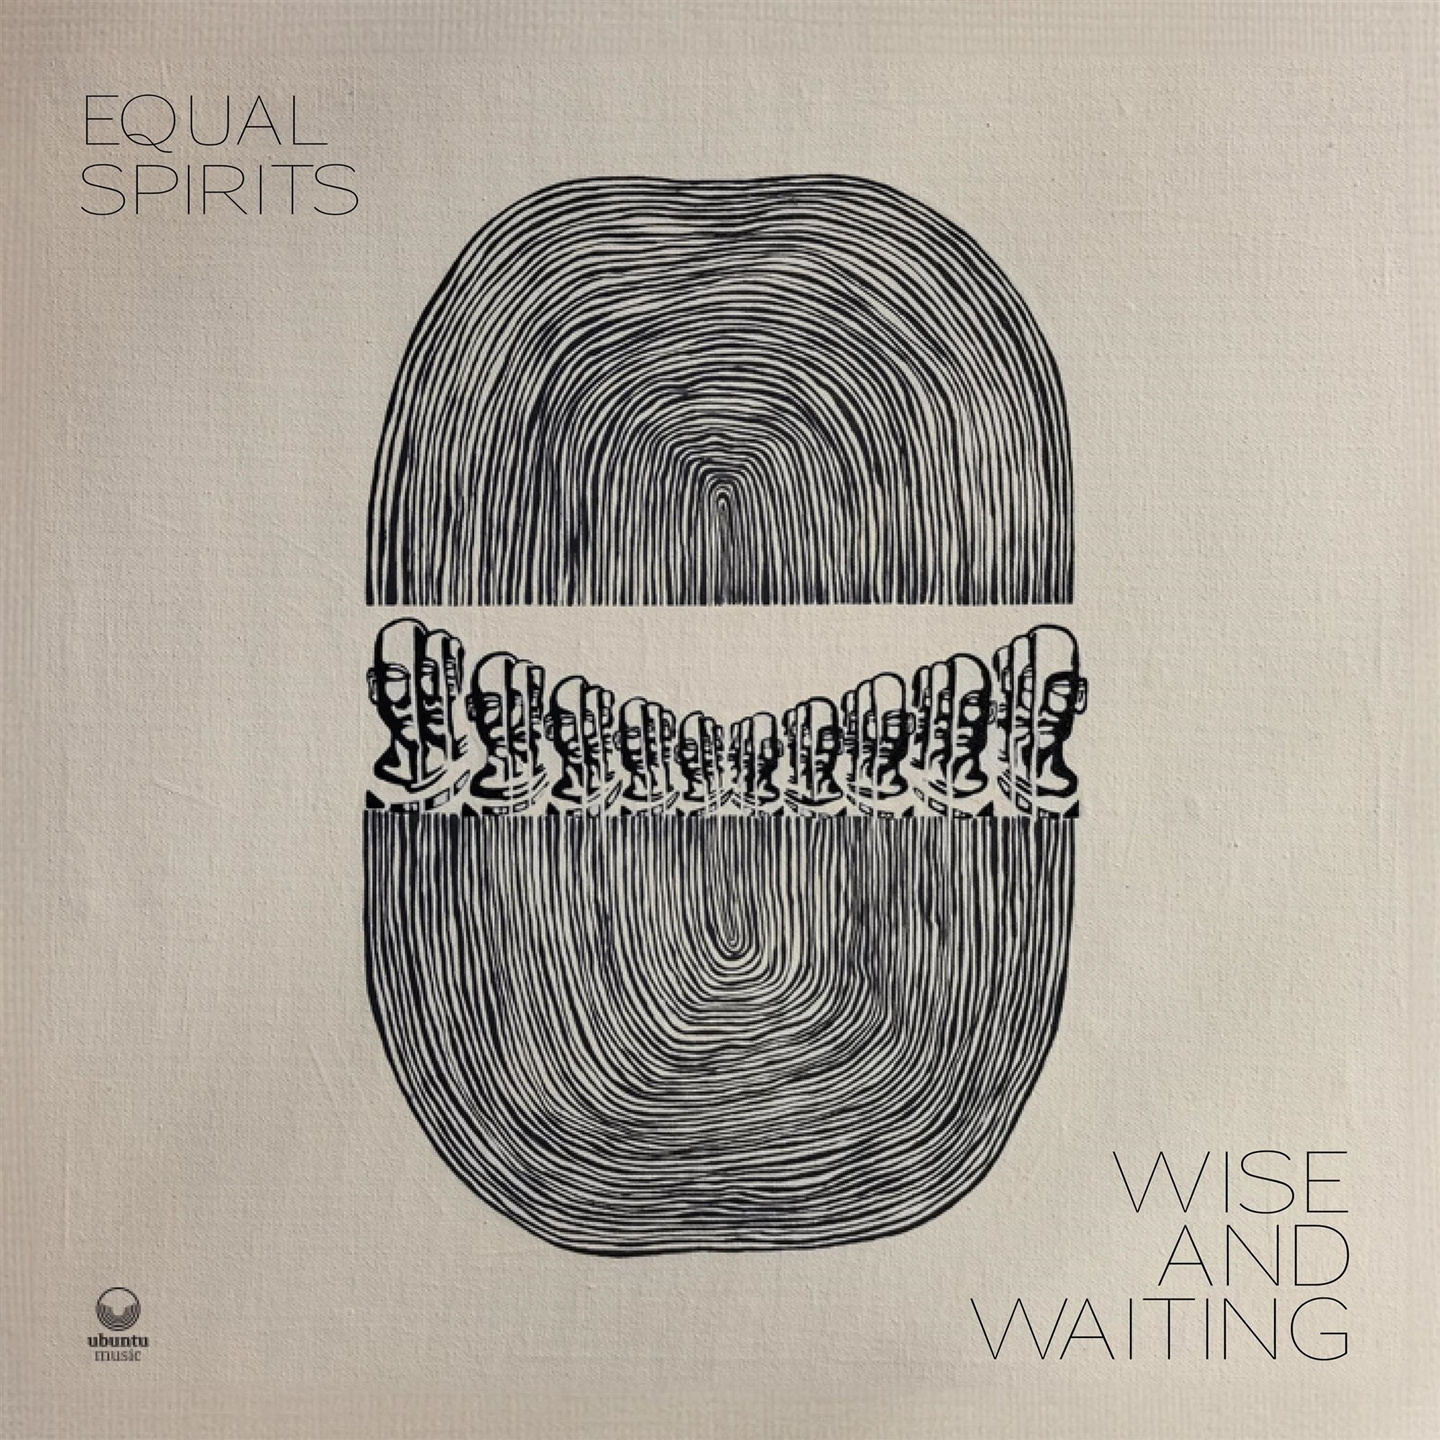 WISE AND WAITING